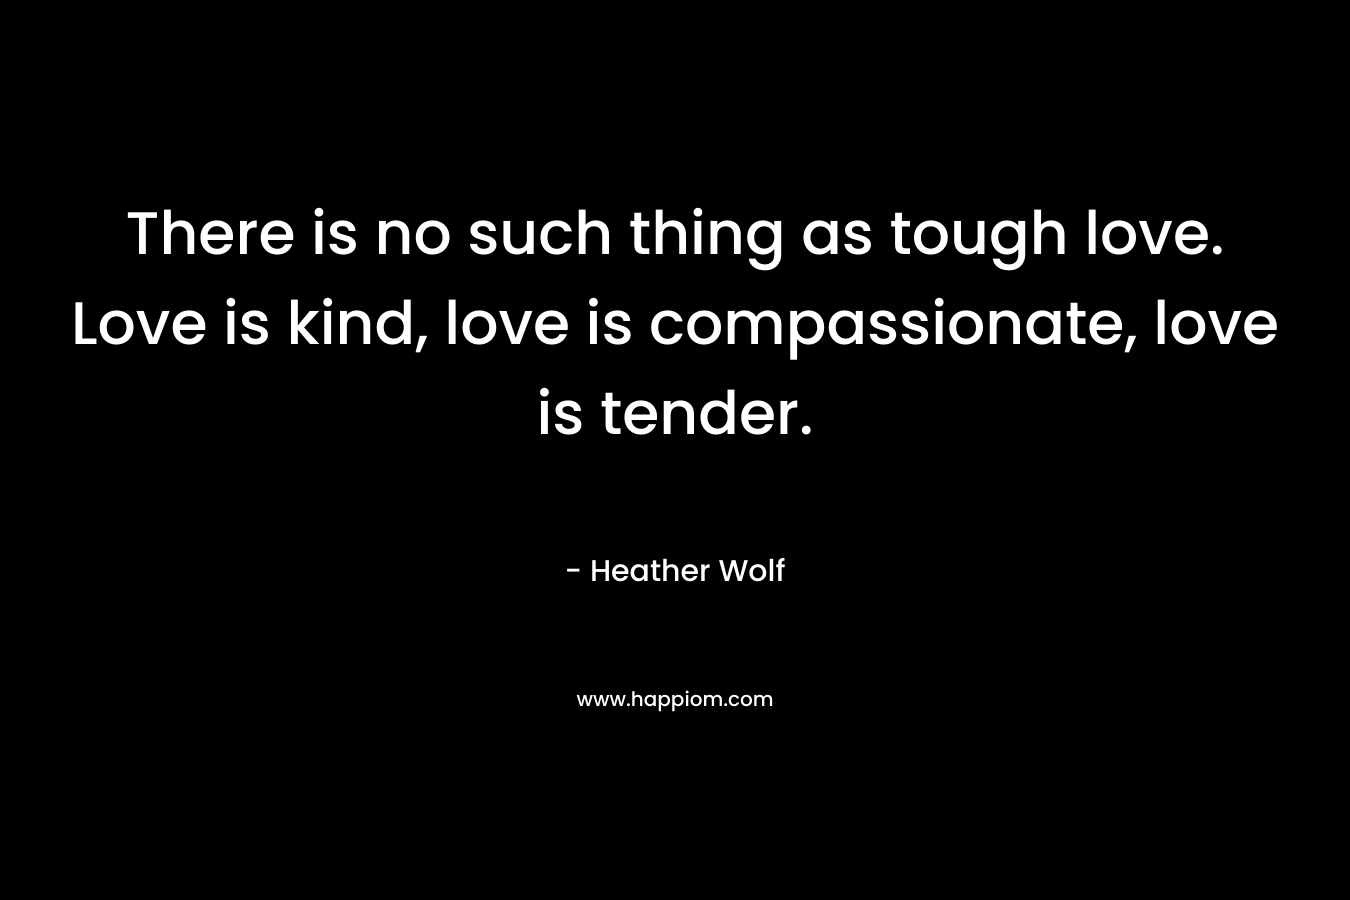 There is no such thing as tough love. Love is kind, love is compassionate, love is tender.